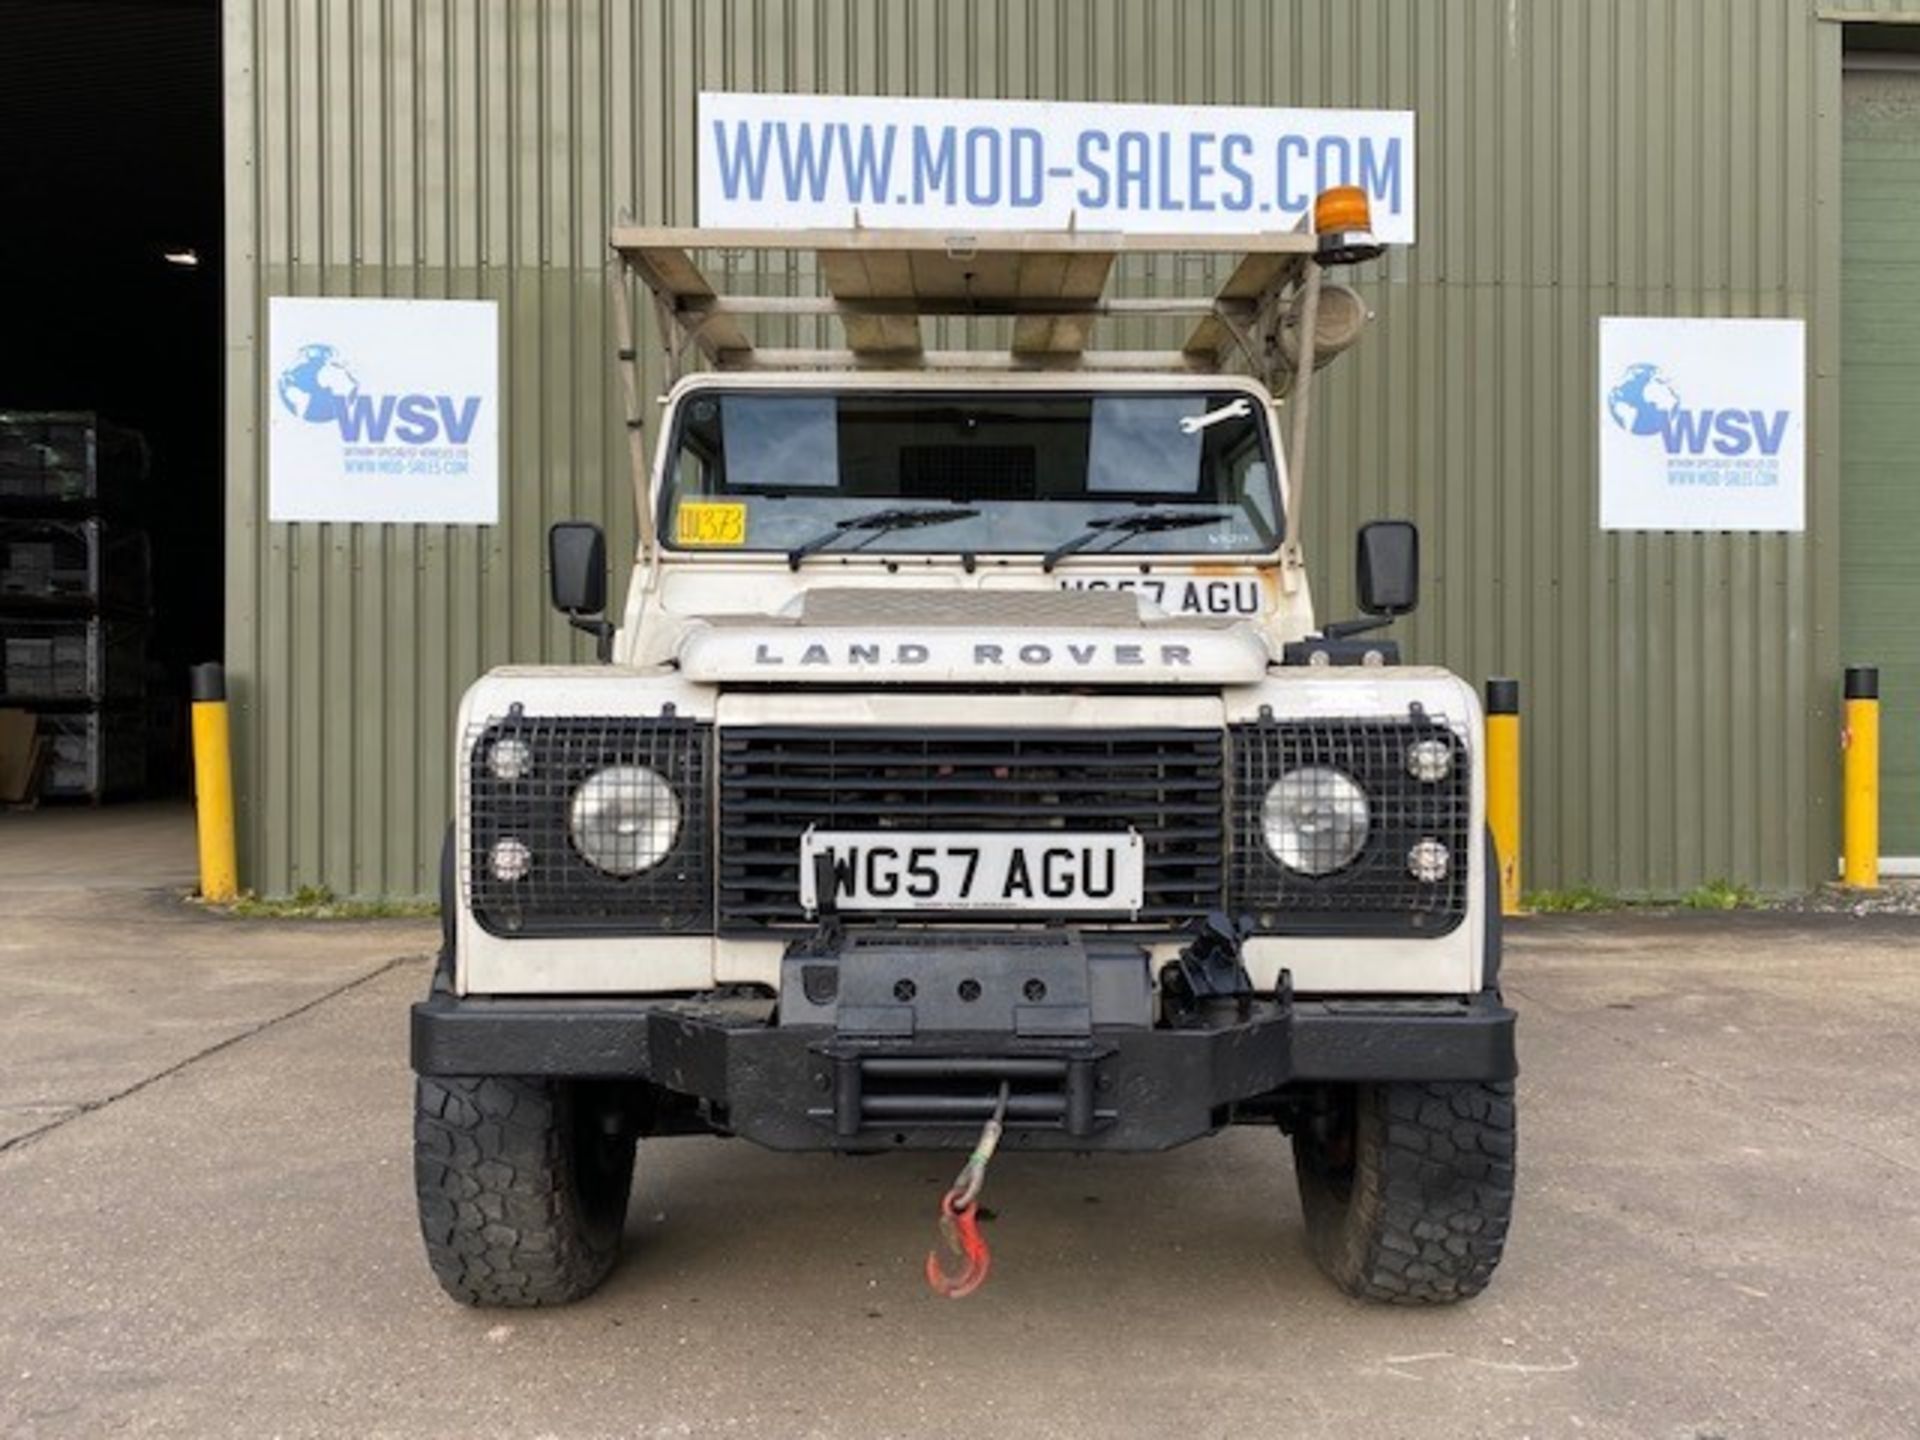 Land Rover Defender 110 Utility - Image 2 of 60